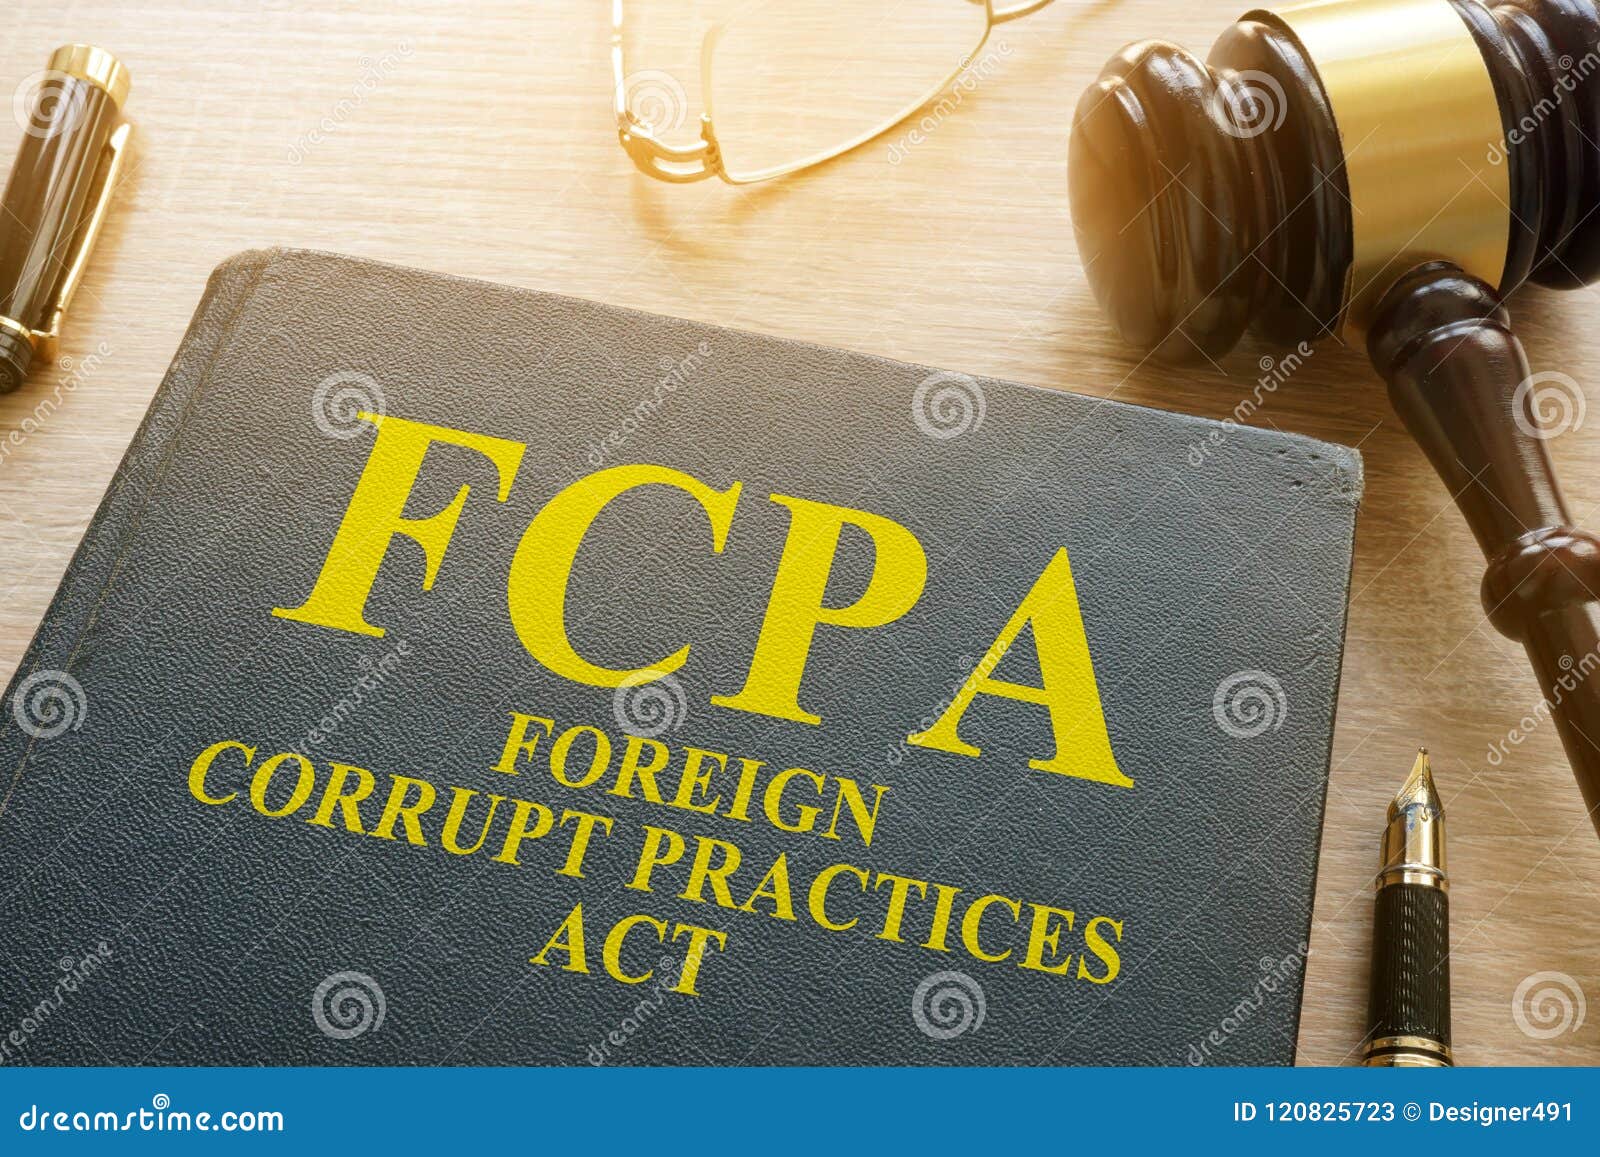 fcpa foreign corrupt practices act on a desk.